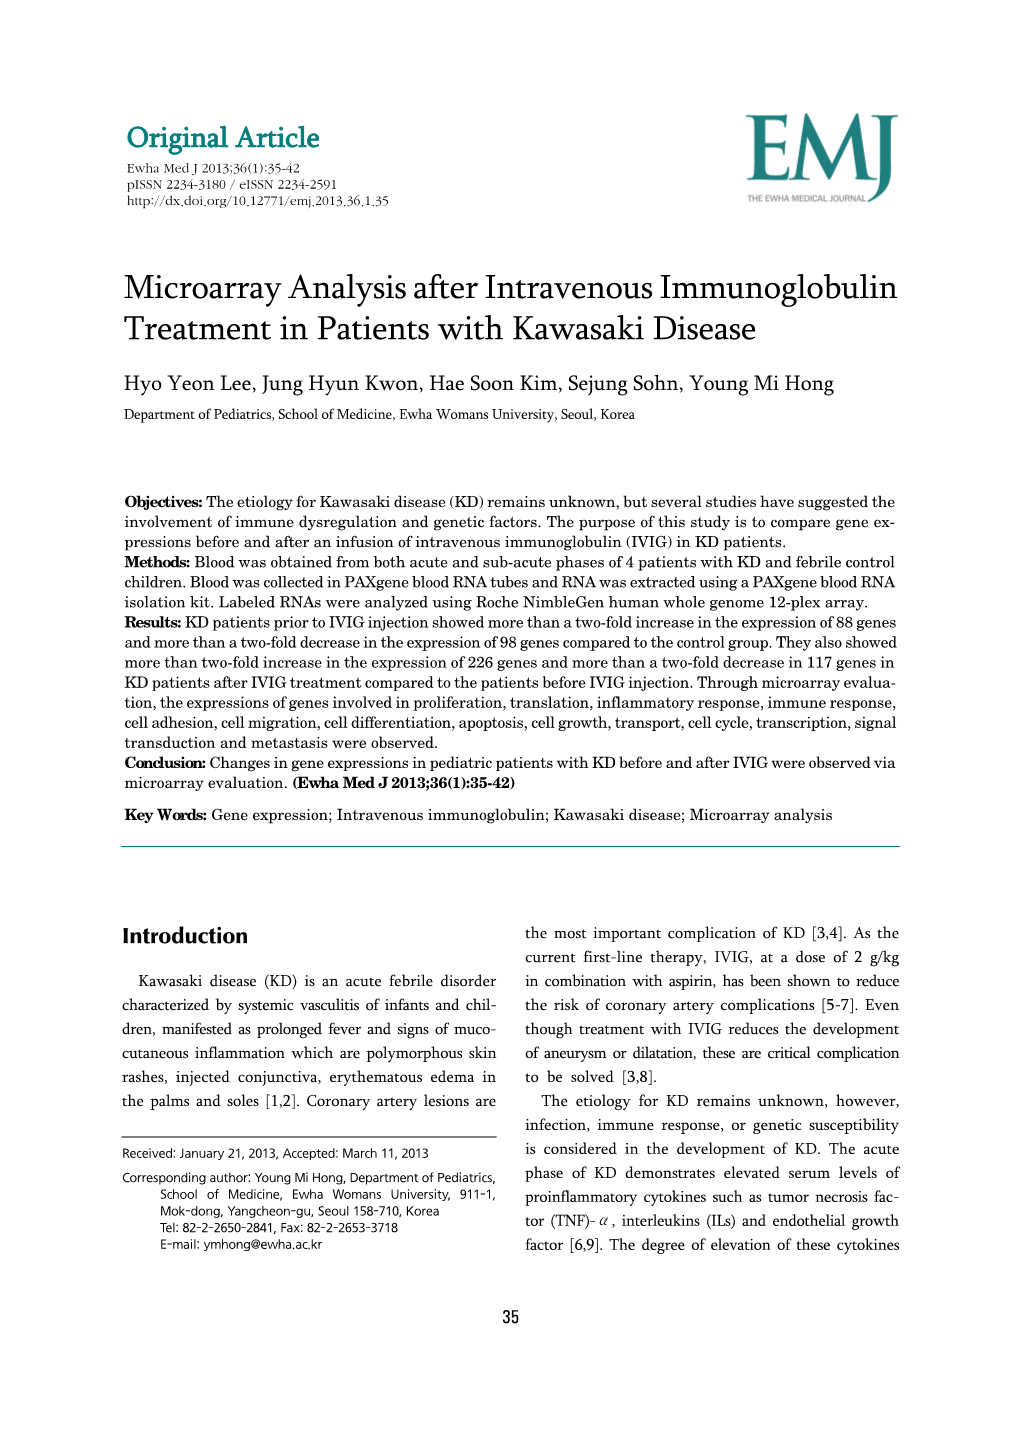 Microarray Analysis After Intravenous Immunoglobulin Treatment in Patients with Kawasaki Disease